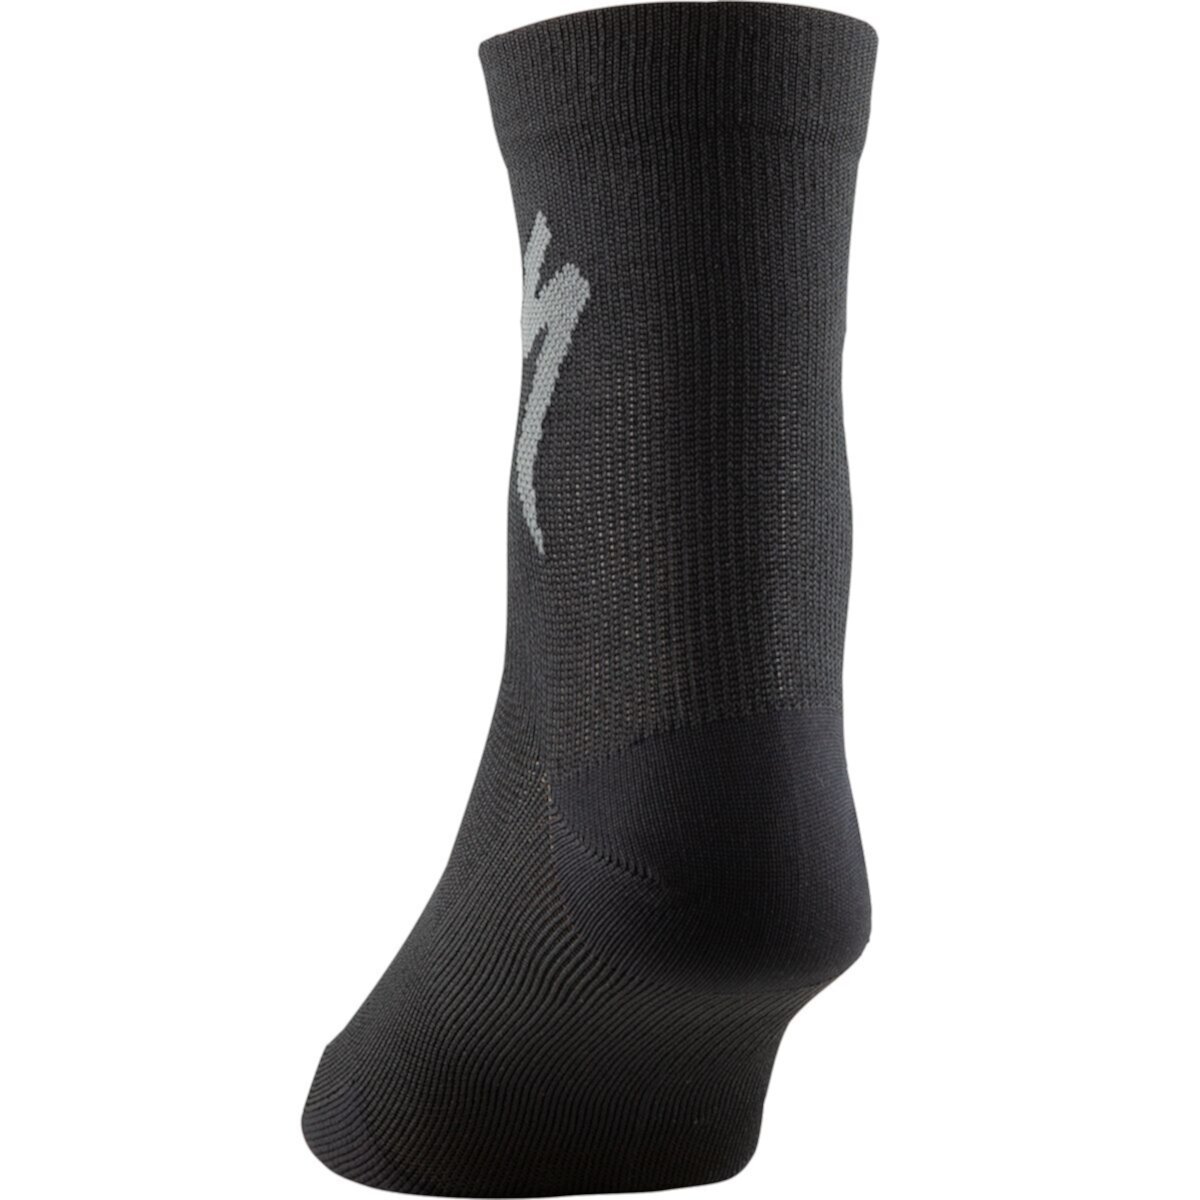 Носки Specialized Soft Air Road Mid Sock Specialized